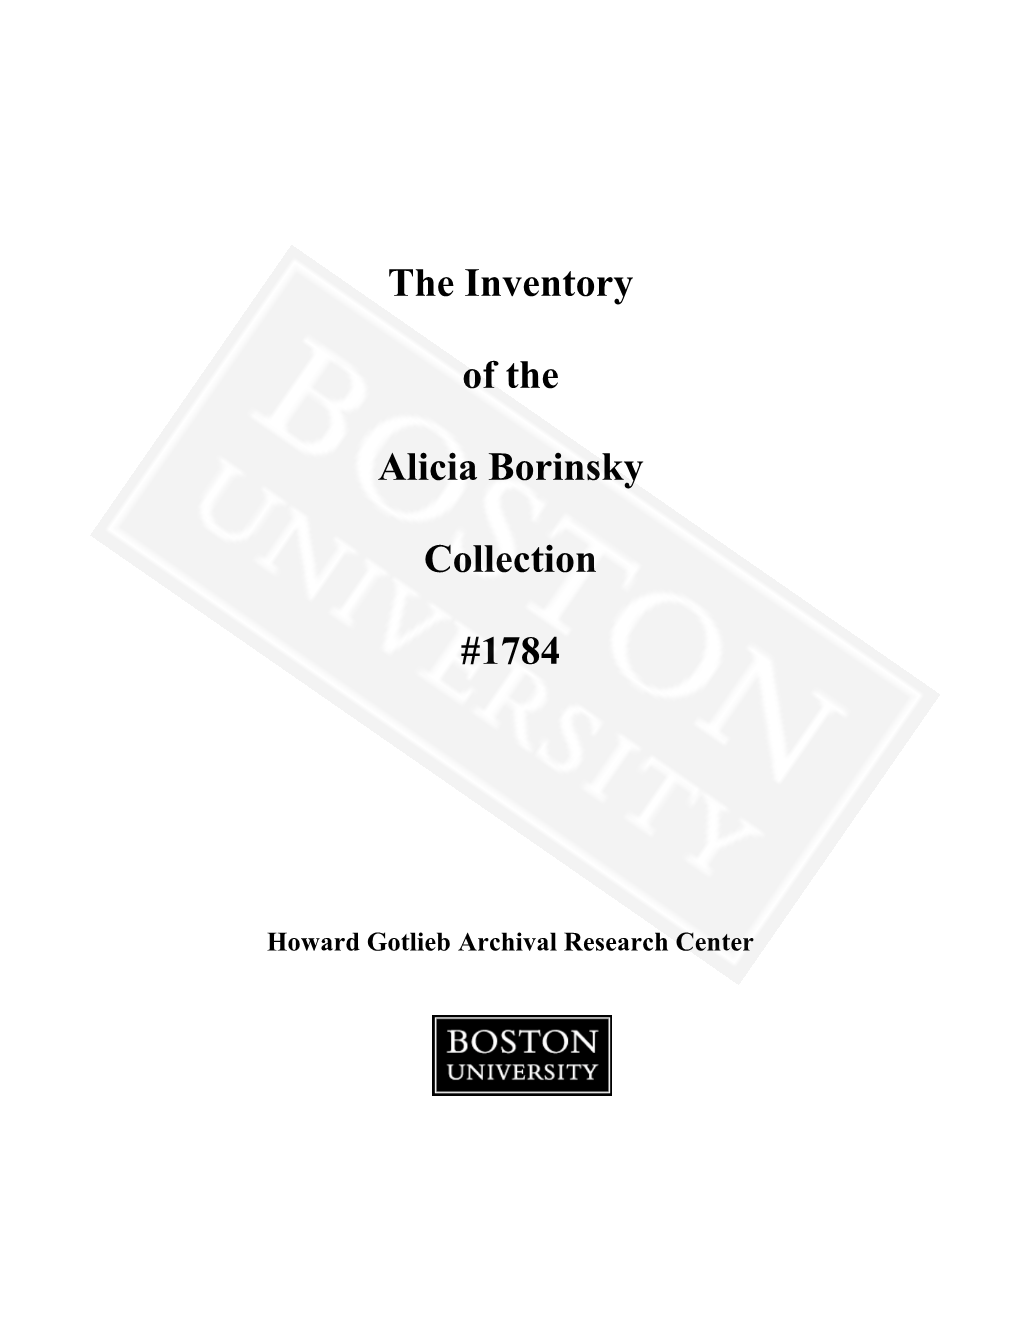 The Inventory of the Alicia Borinsky Collection #1784